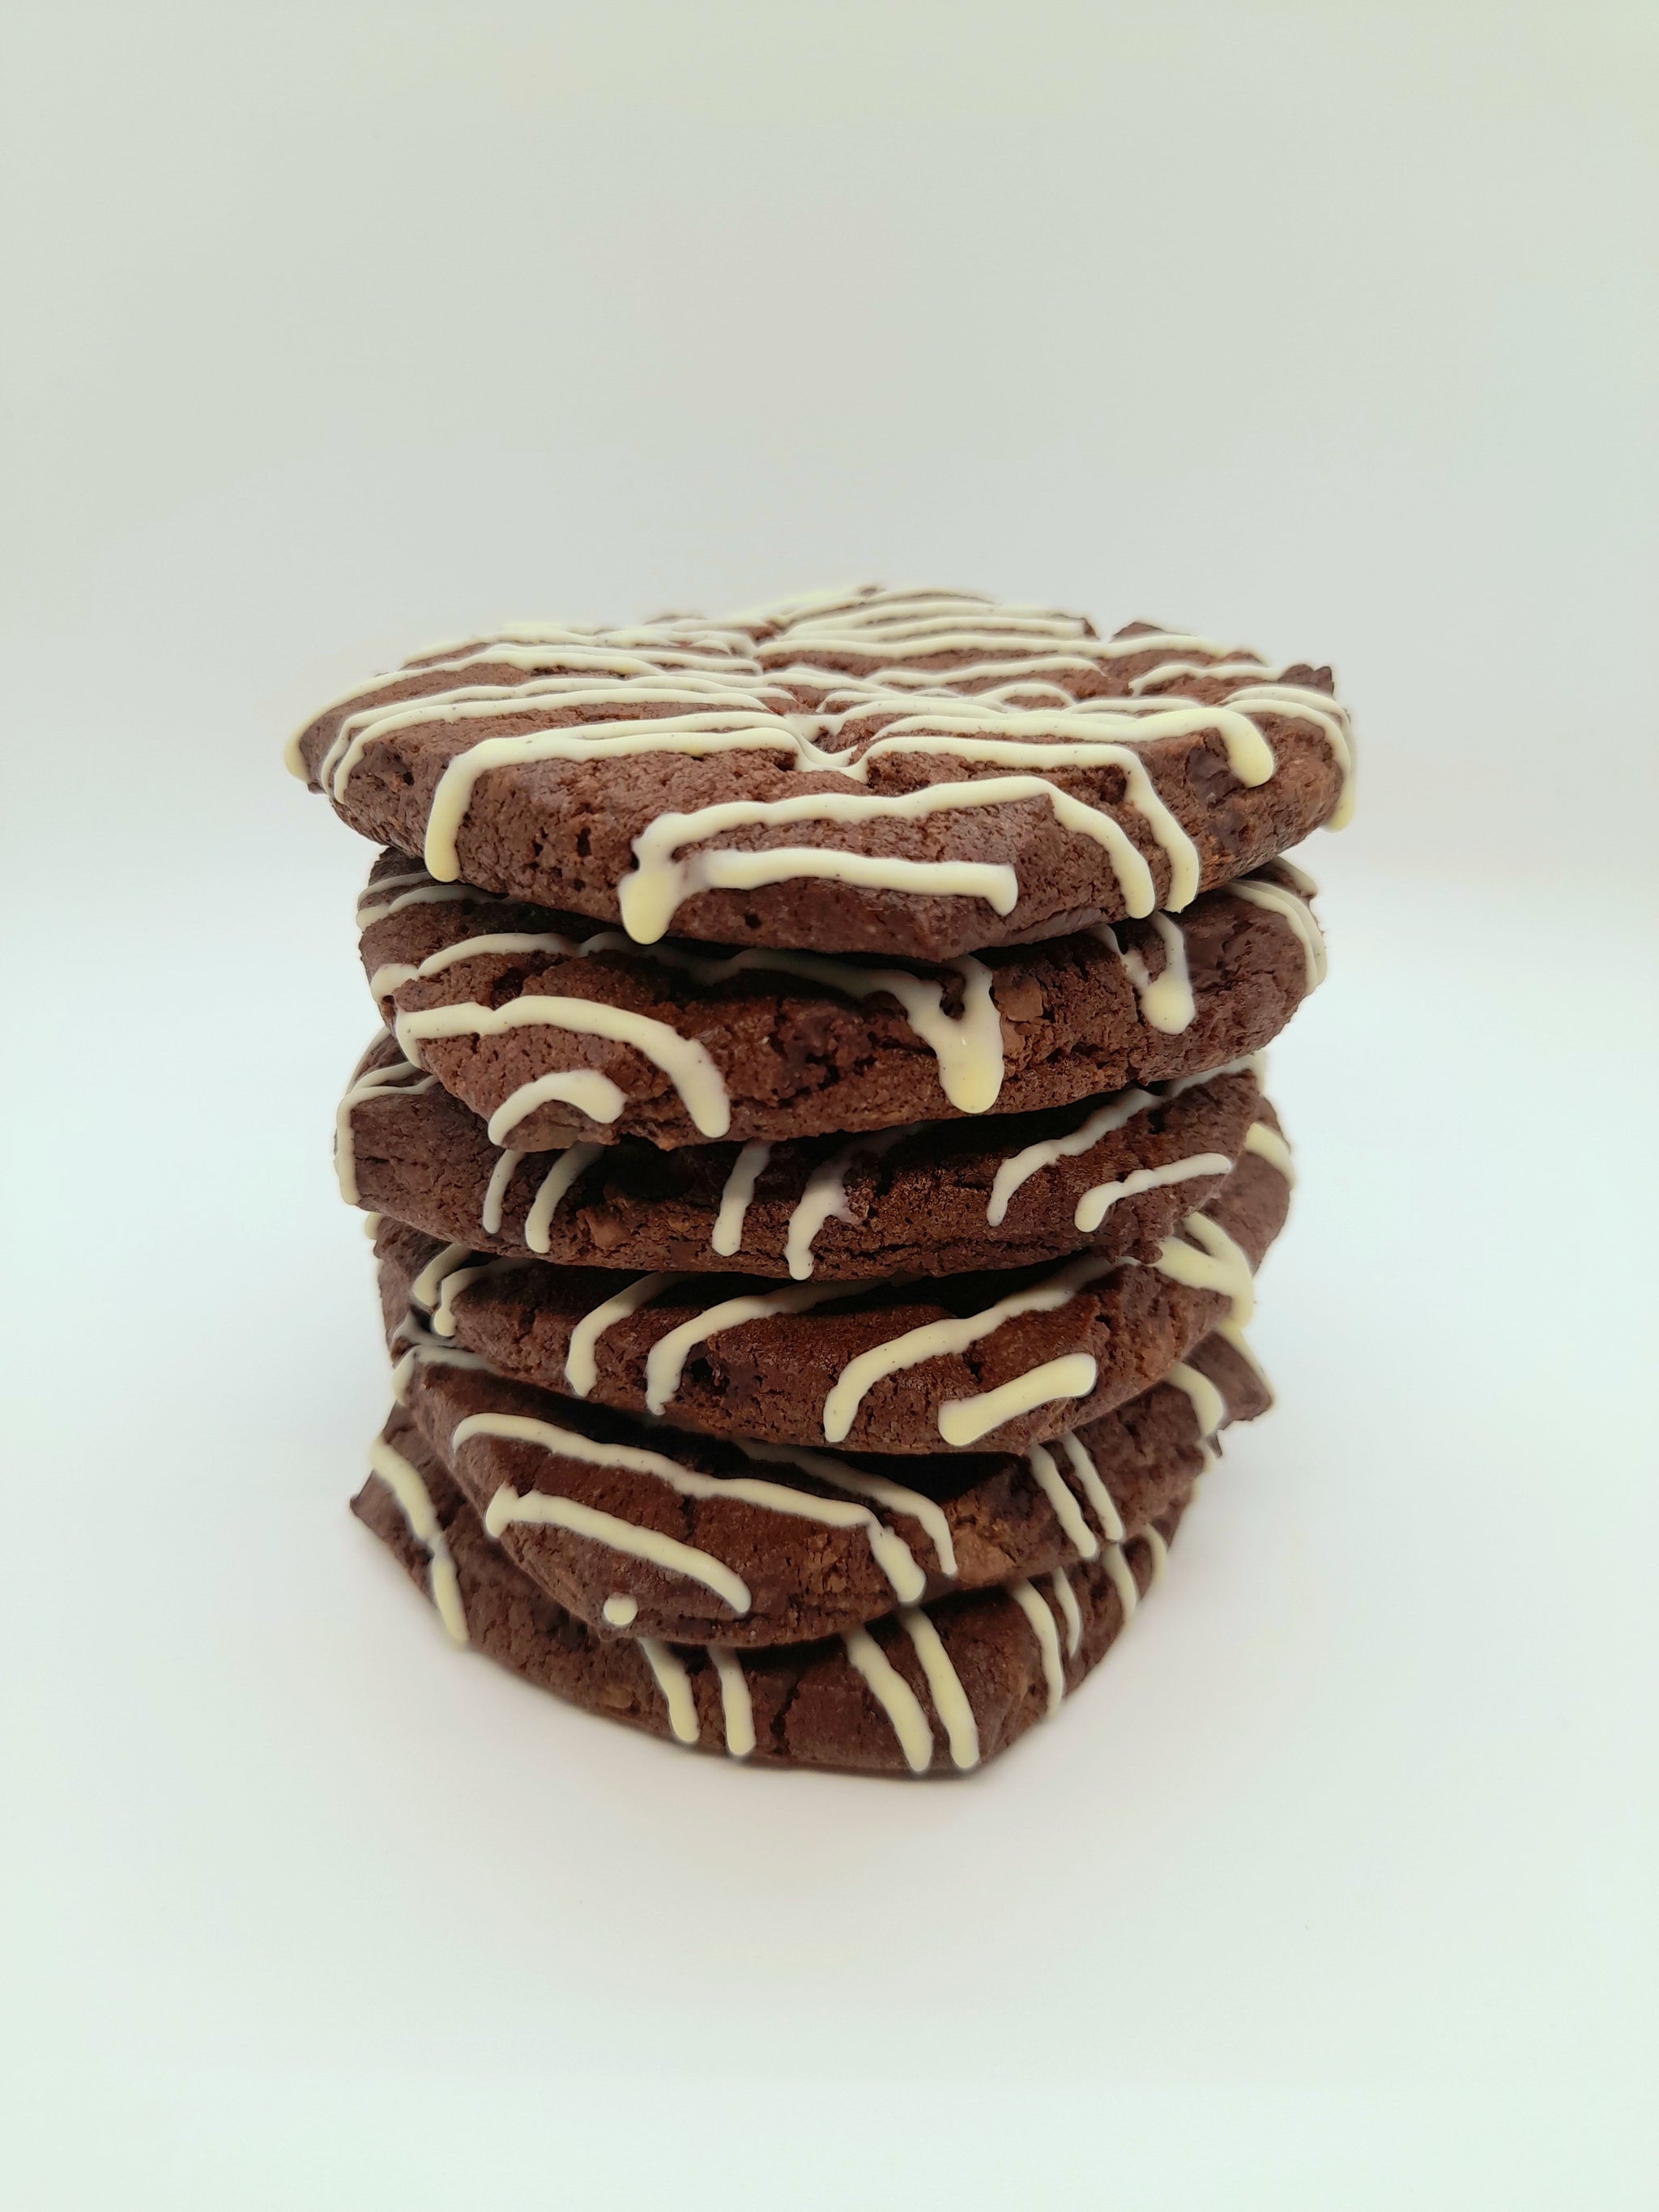 Malted Chocolate Cookie stack